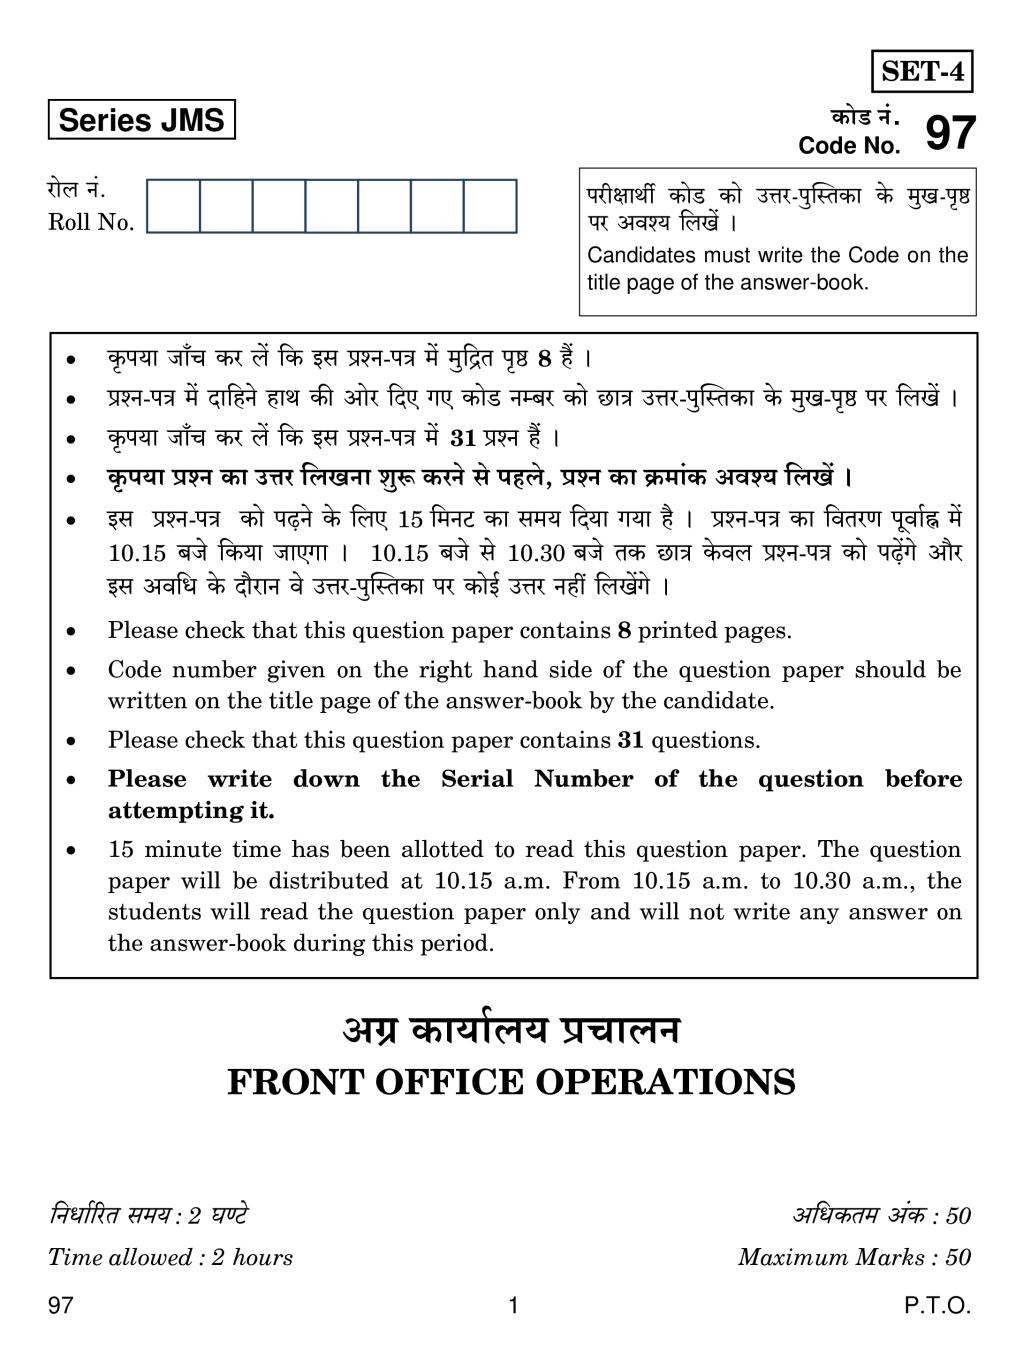 CBSE Class 10 Front Office Operations Question Paper 2019 - Page 1